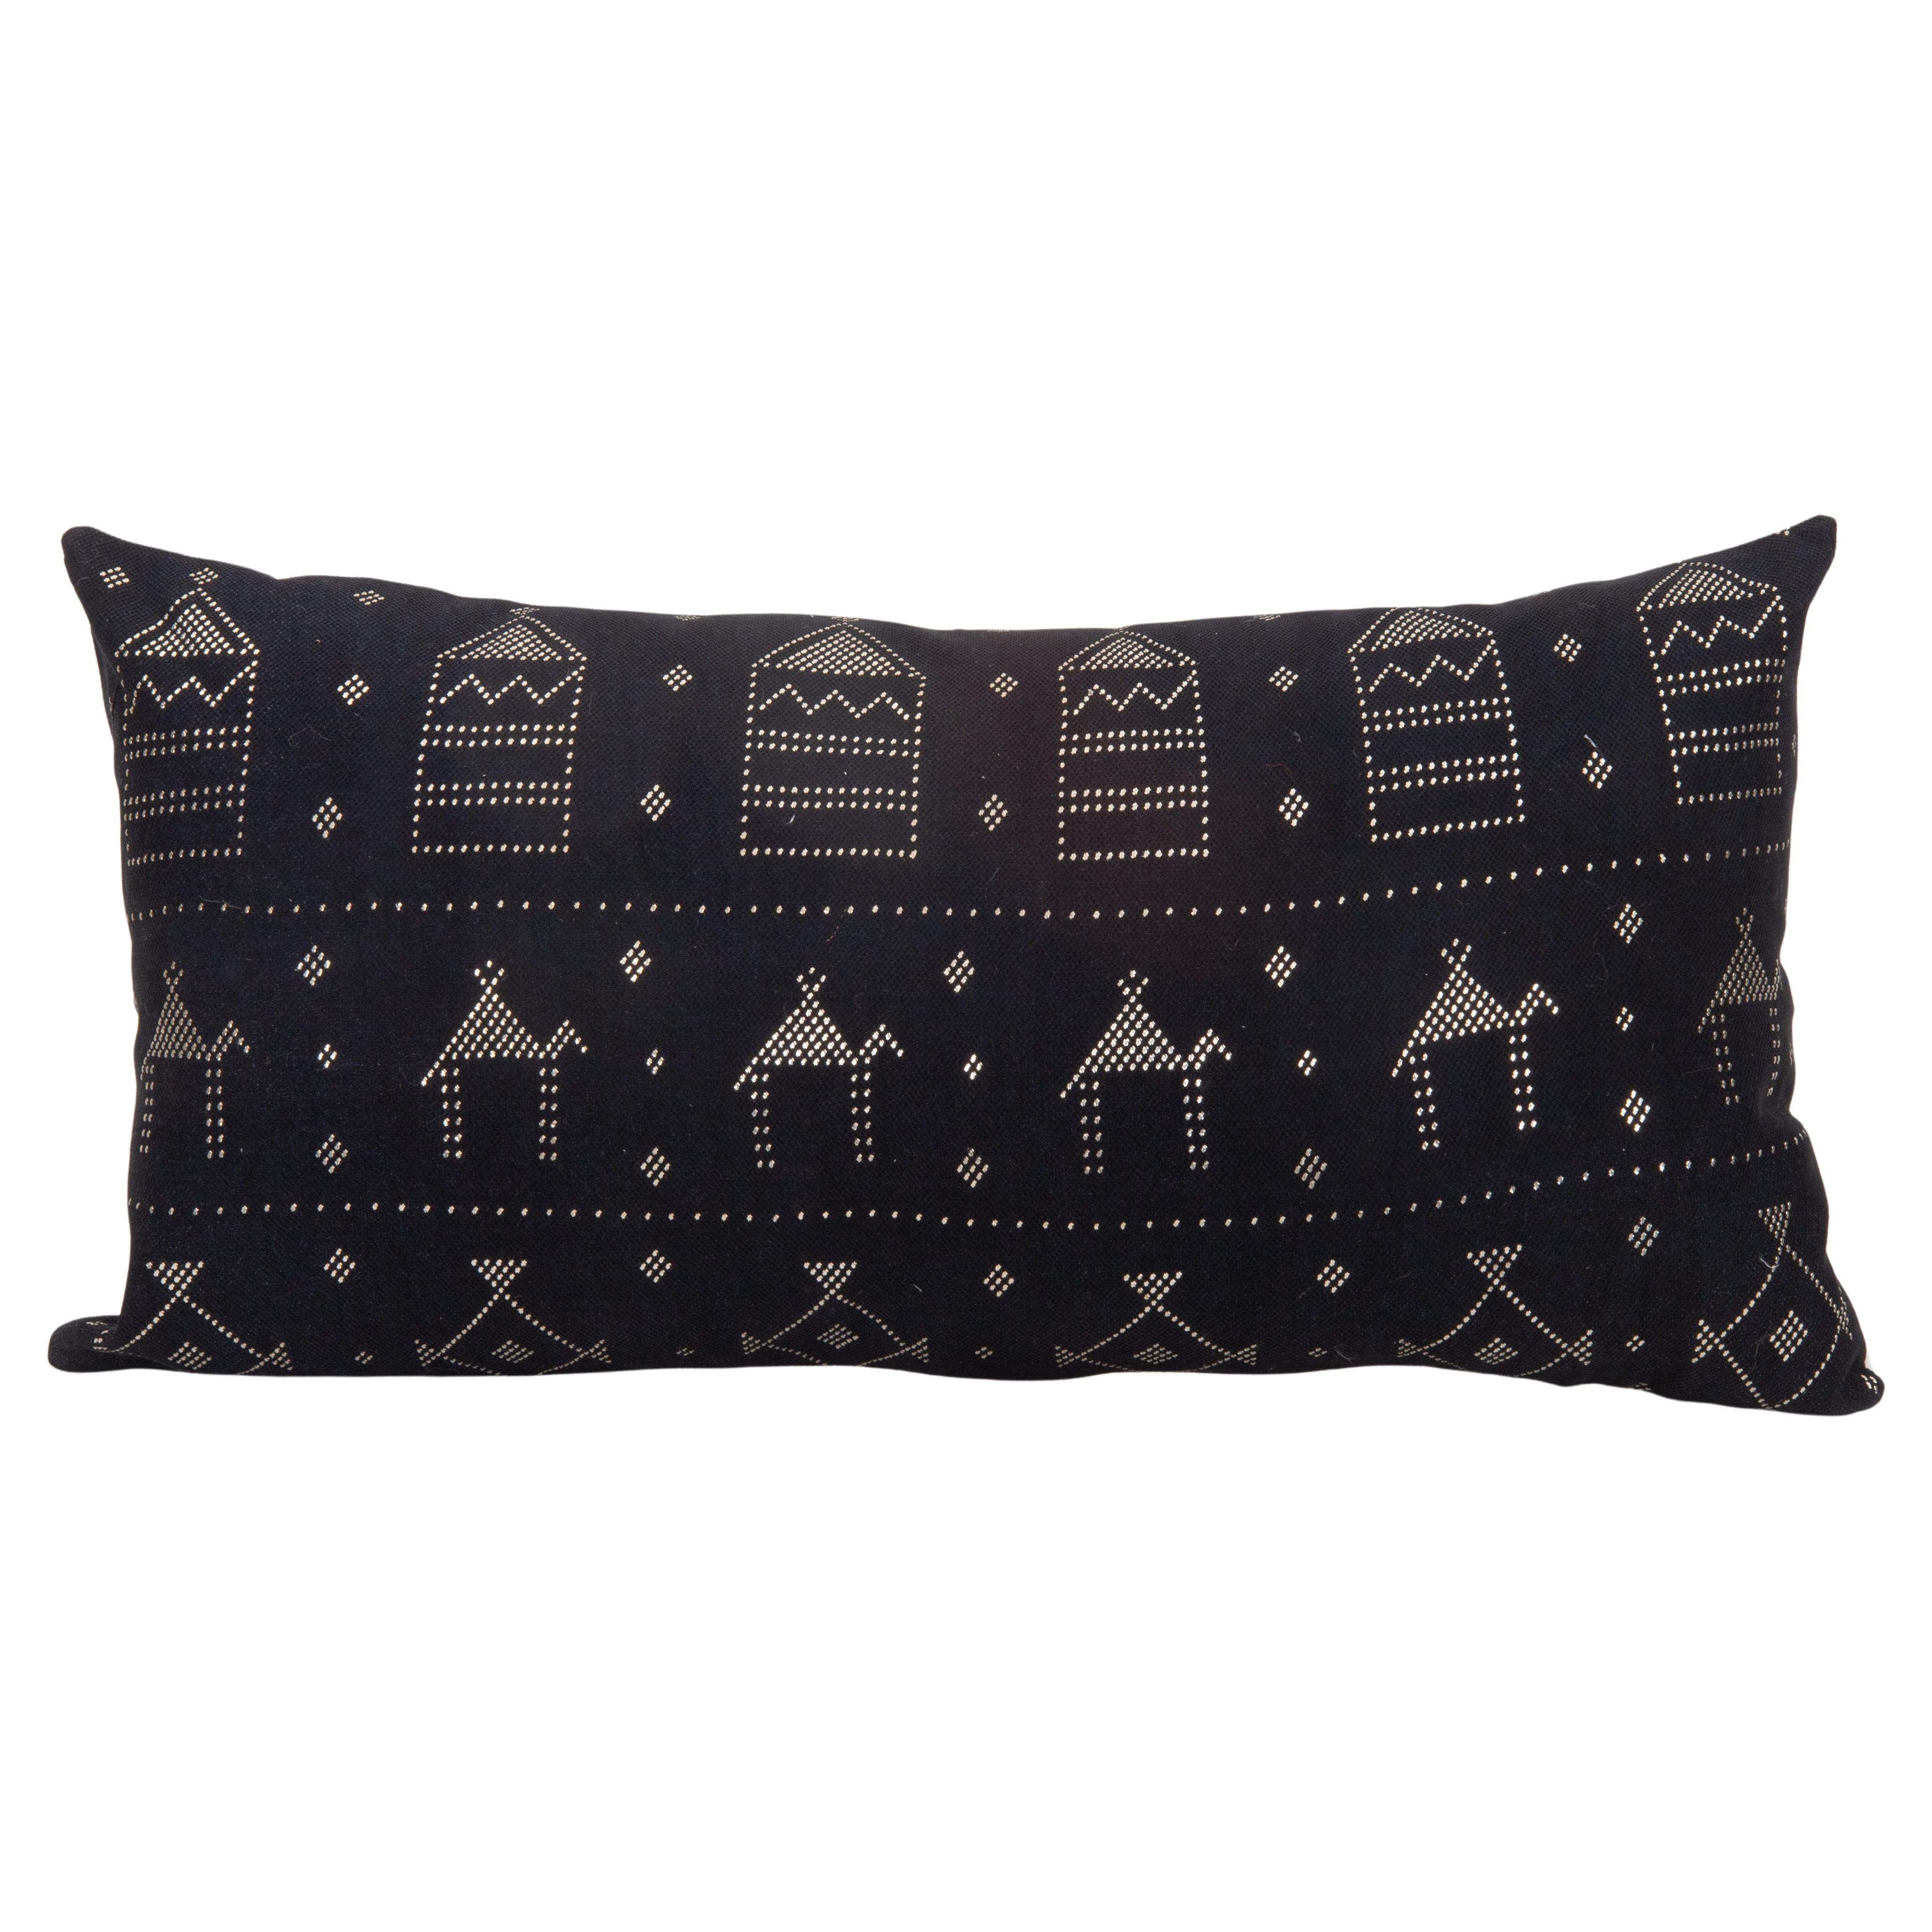 Pillow Cover Fashioned from  Vintage Egyptian ‘tulli bi telli’, Assuit Textile